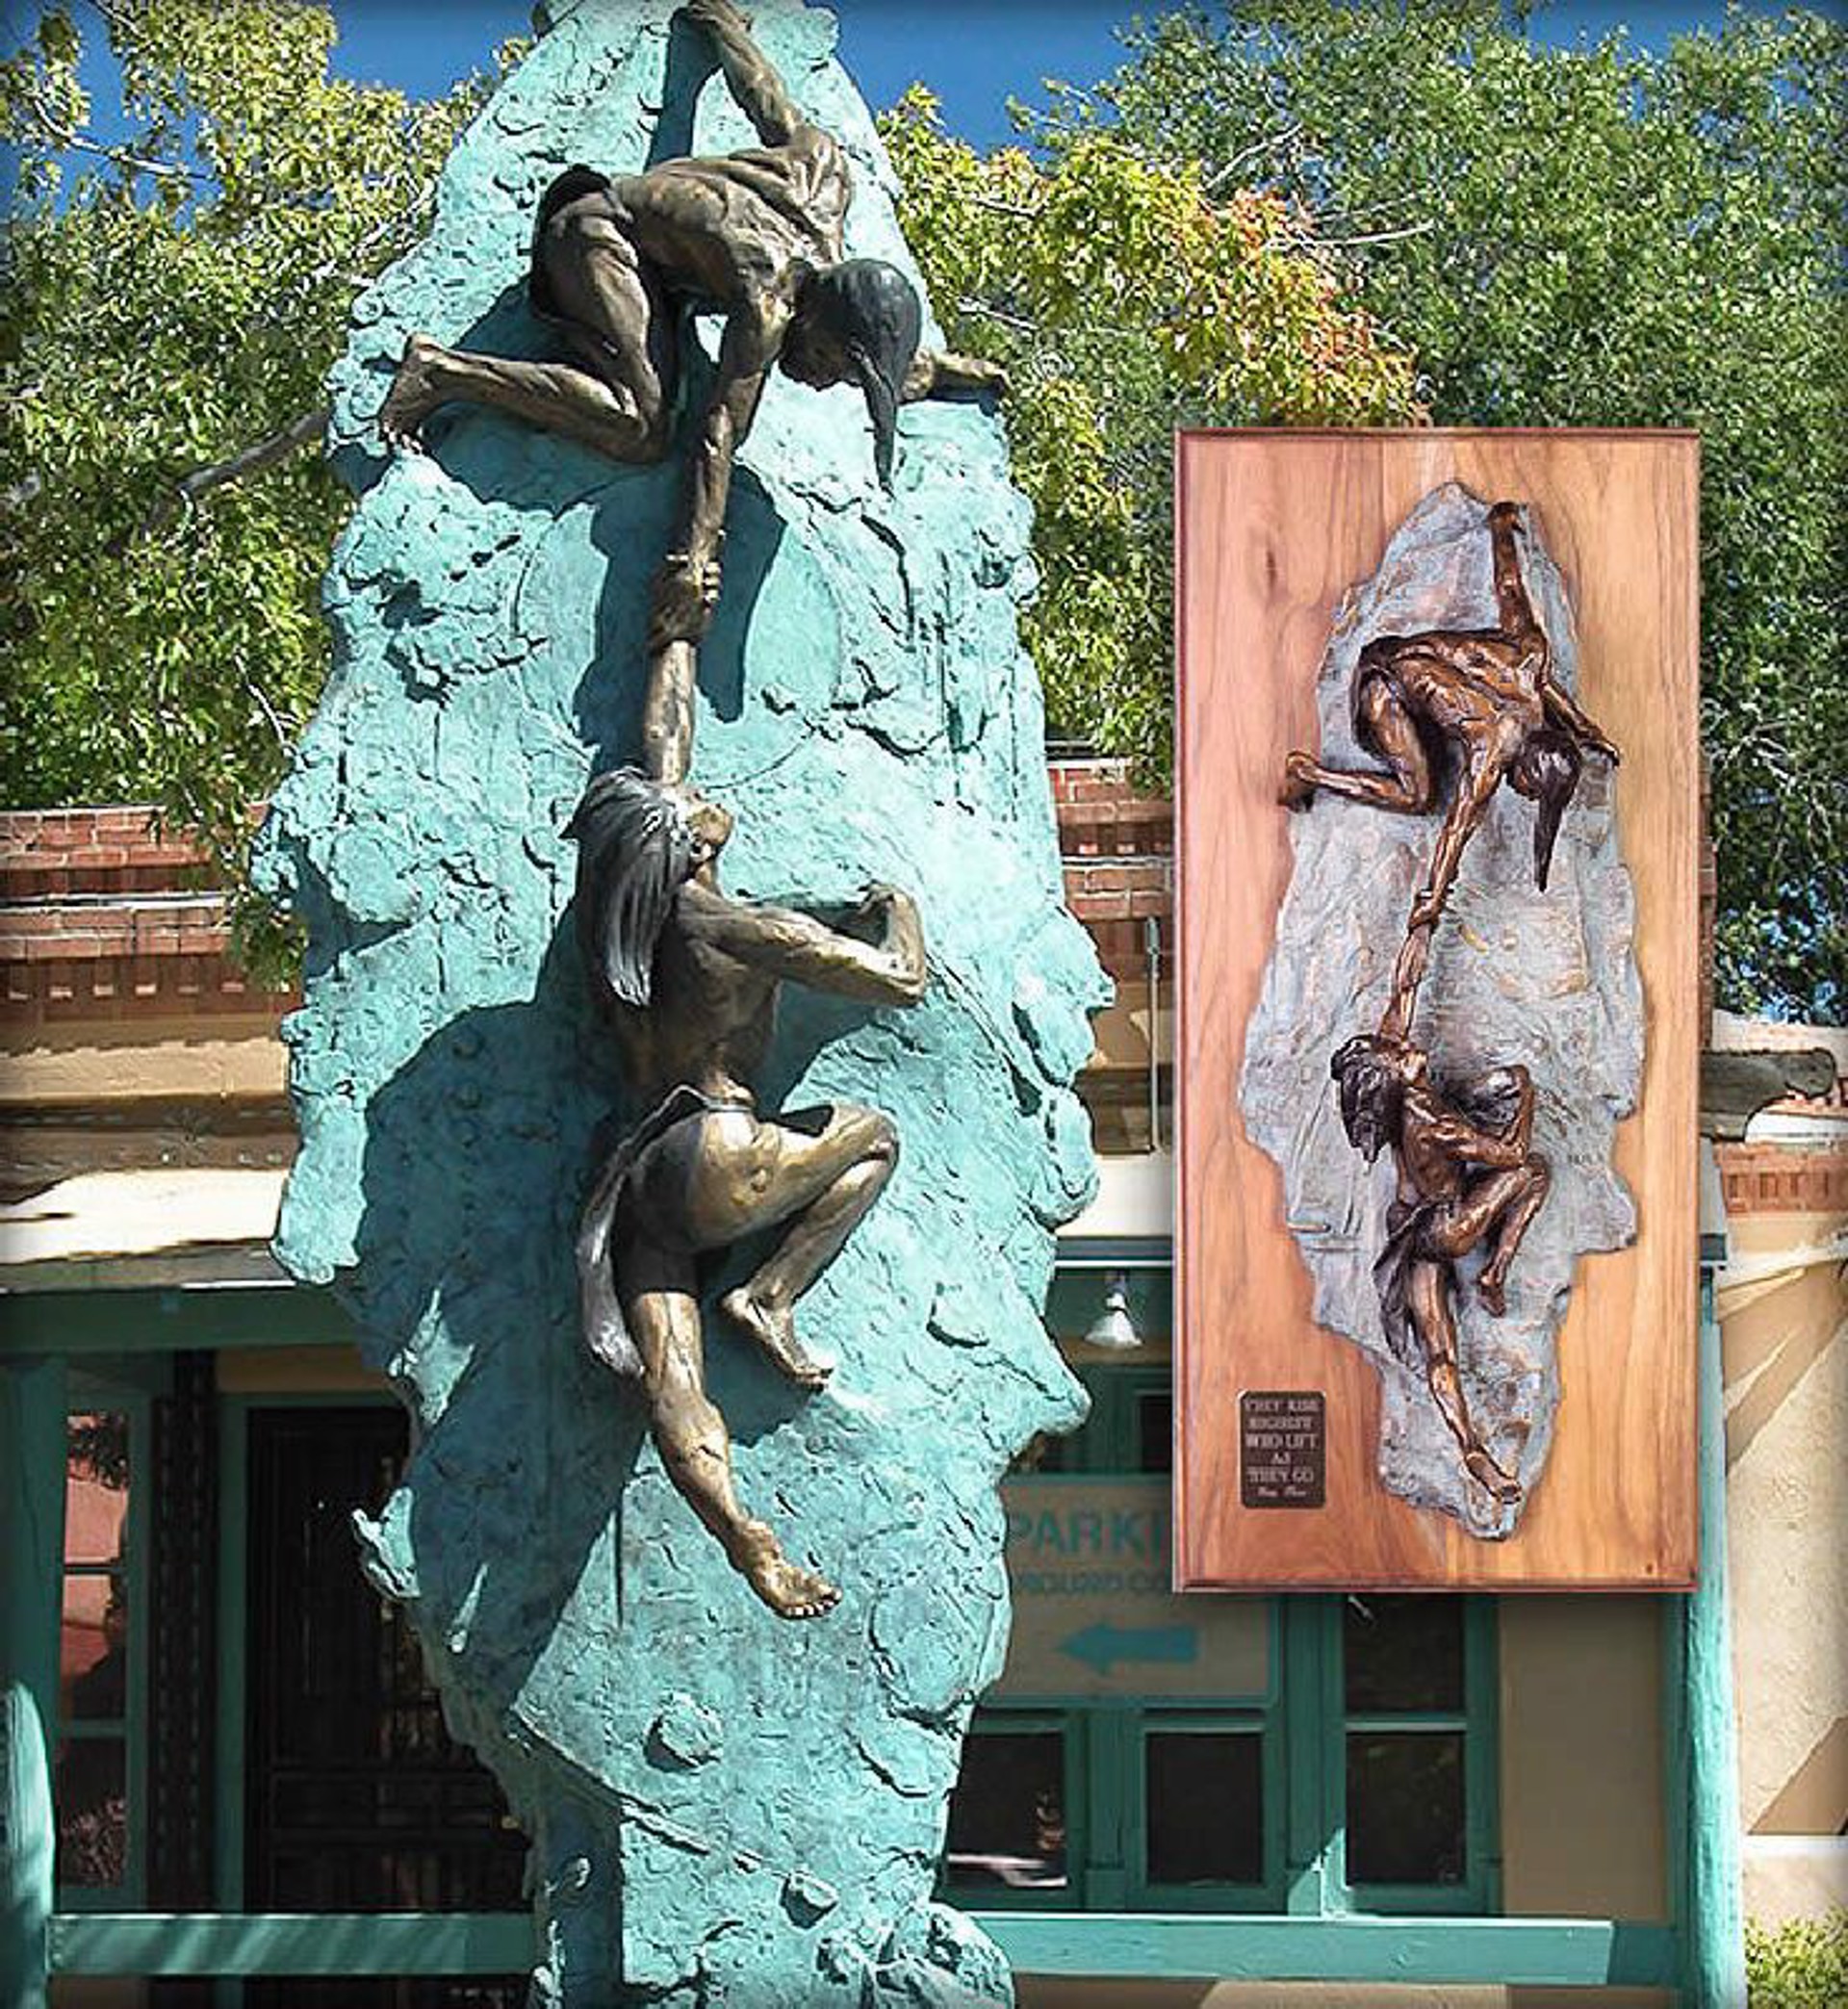 The Ascent by Gary Lee Price (sculptor)